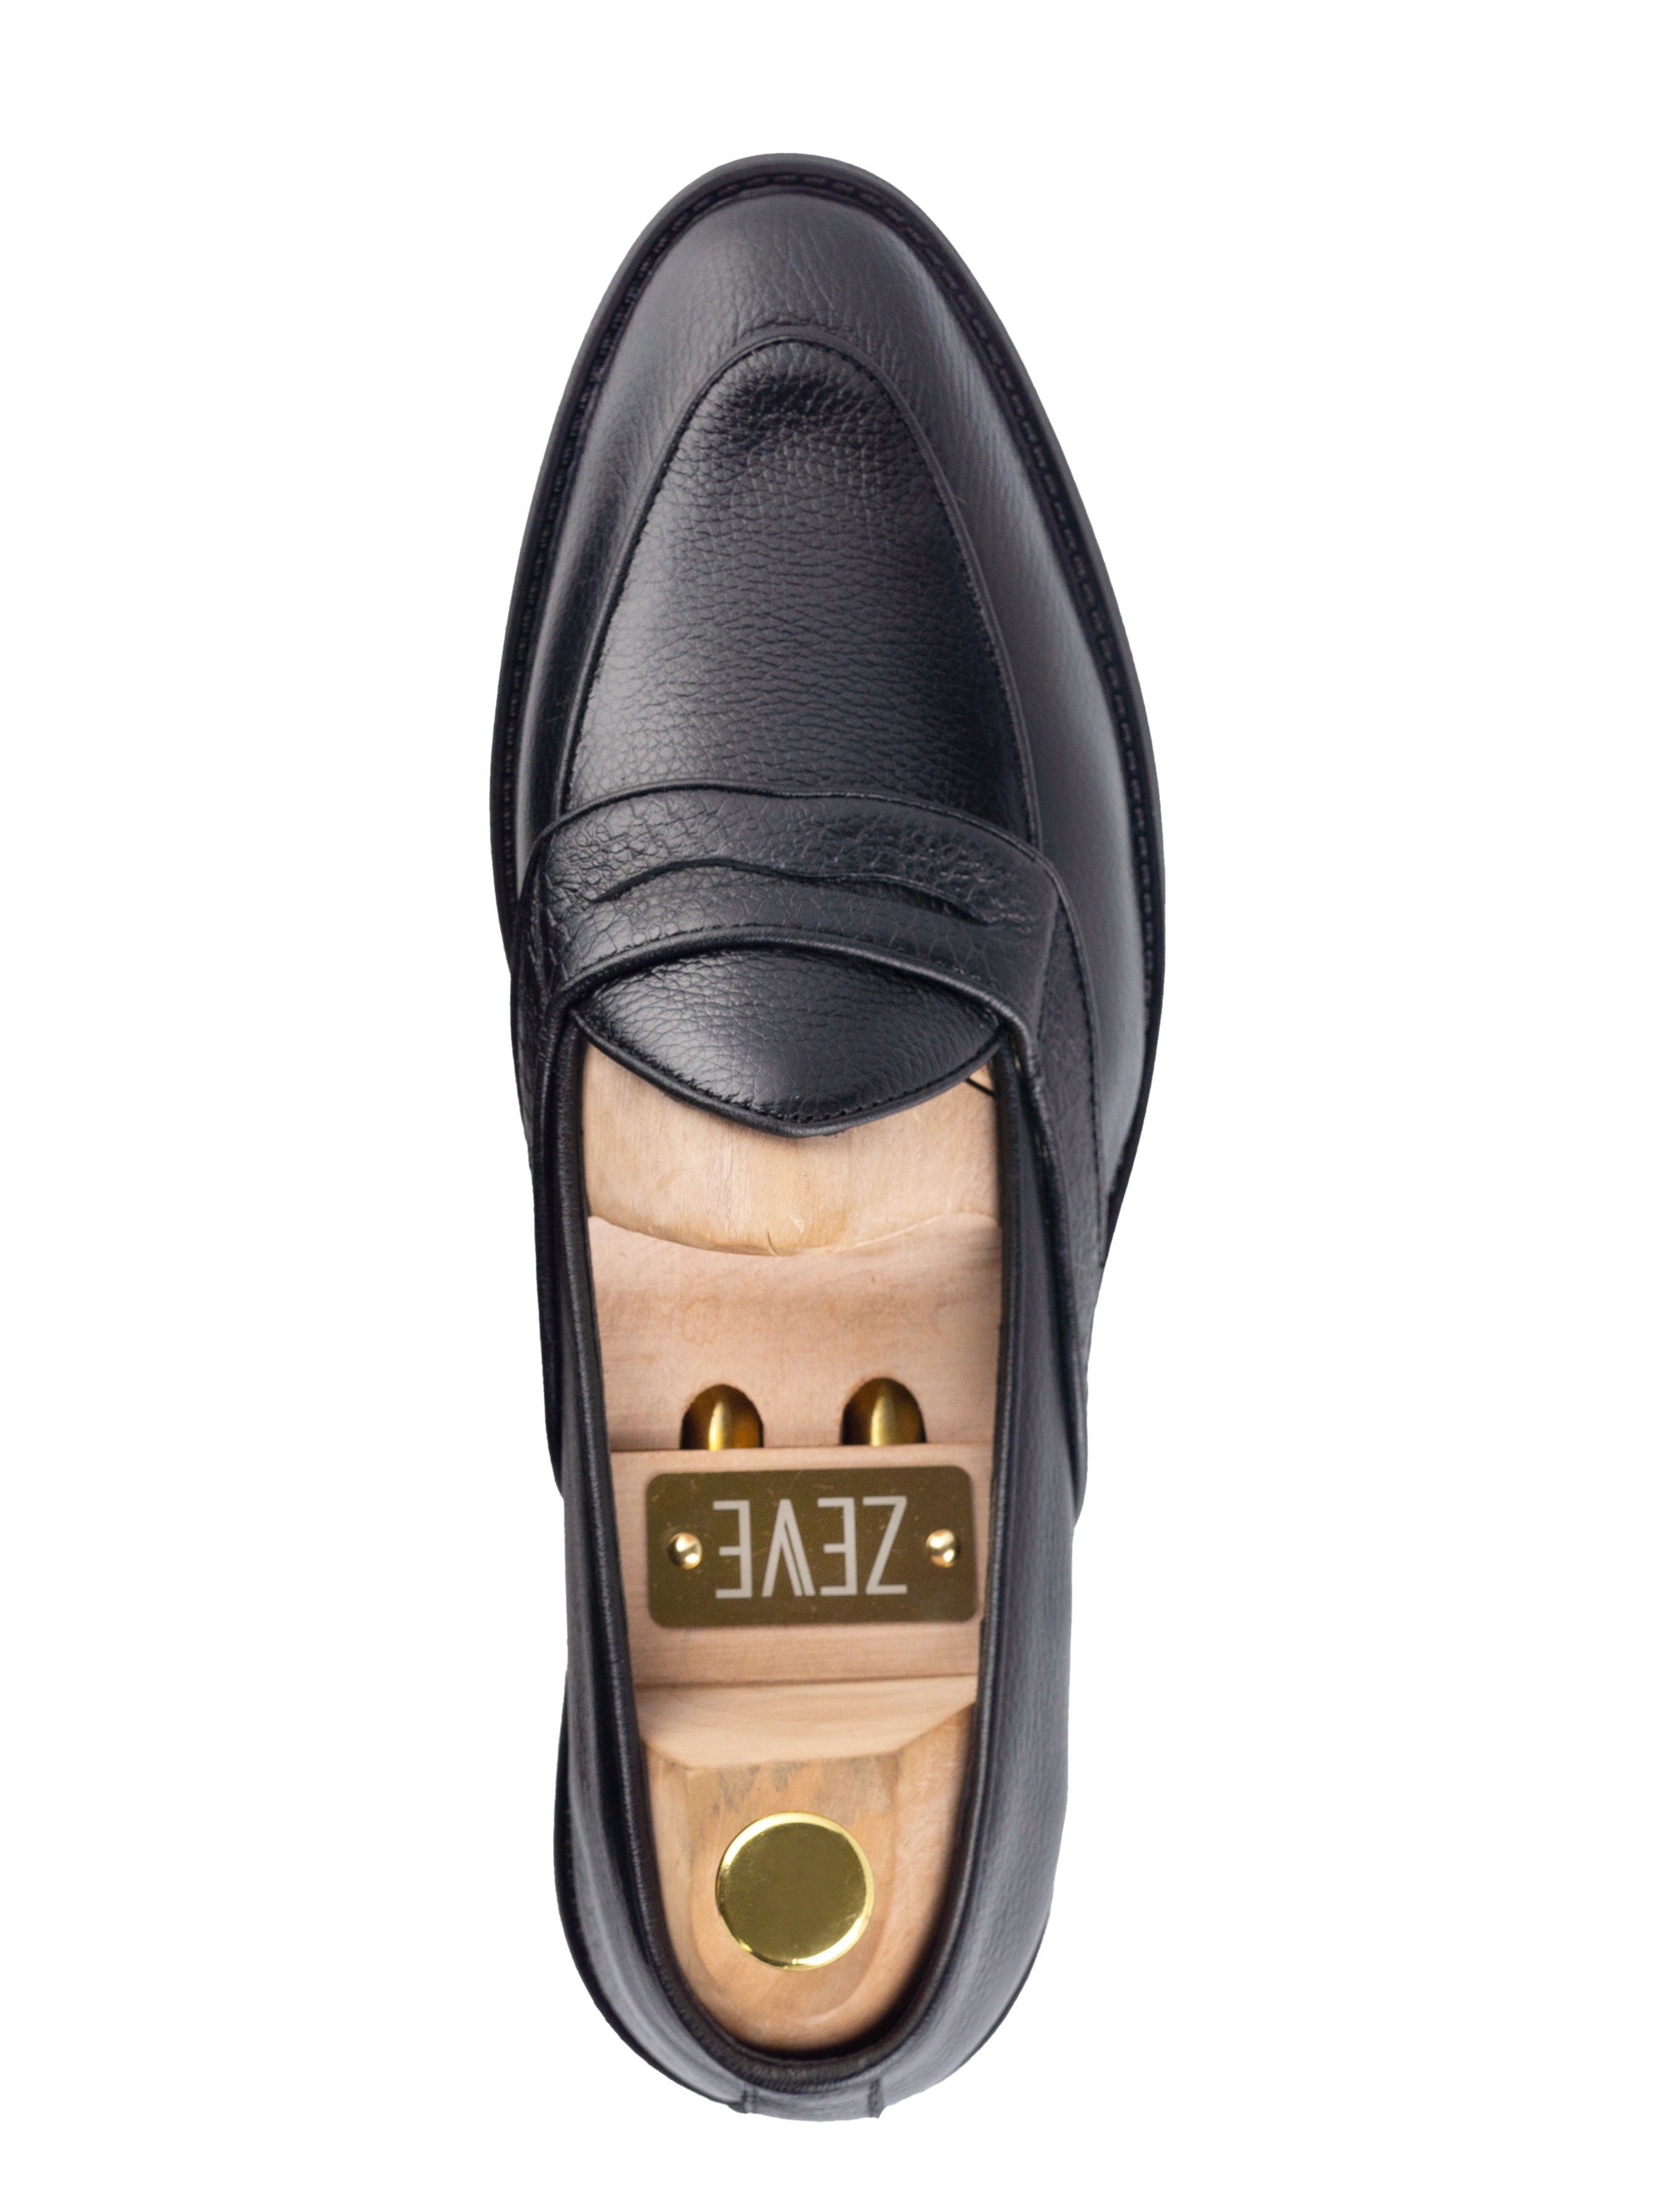 Belgian Loafer with Penny - Black Pebble Grain Leather (Phyton Embossed Strap) - Zeve Shoes